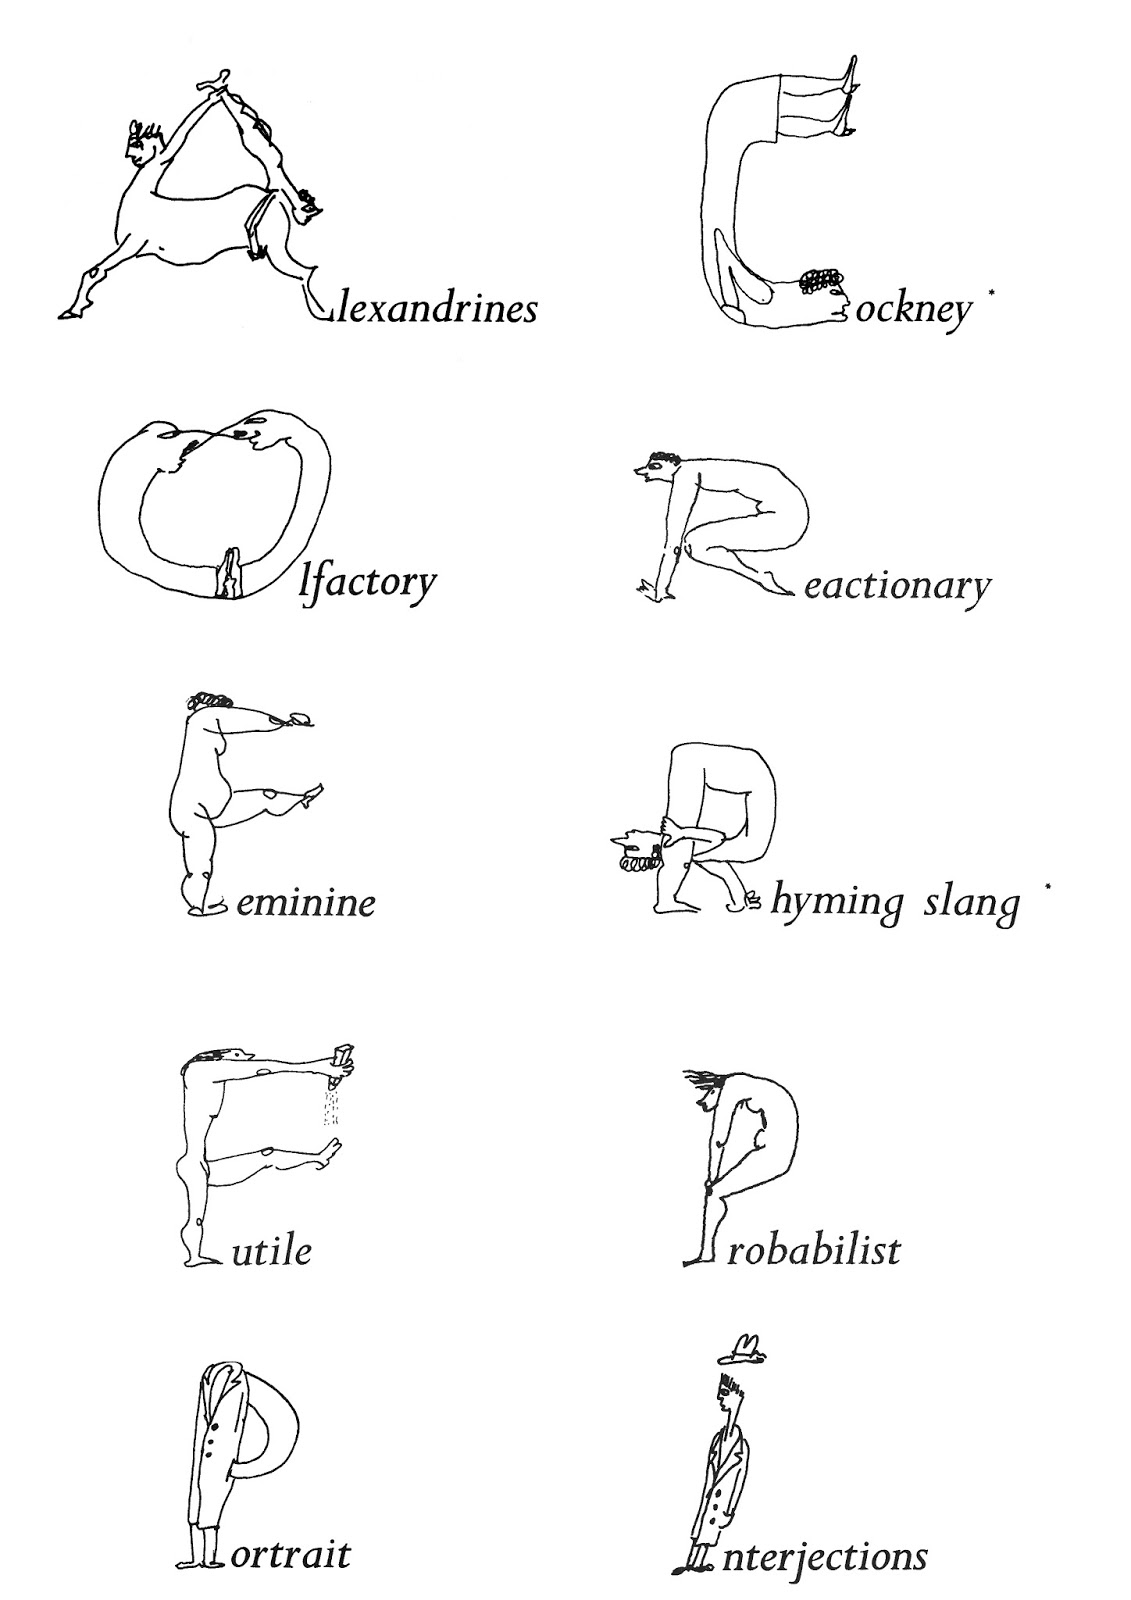 Exercises in Style by Raymond Queneau - Illustrated